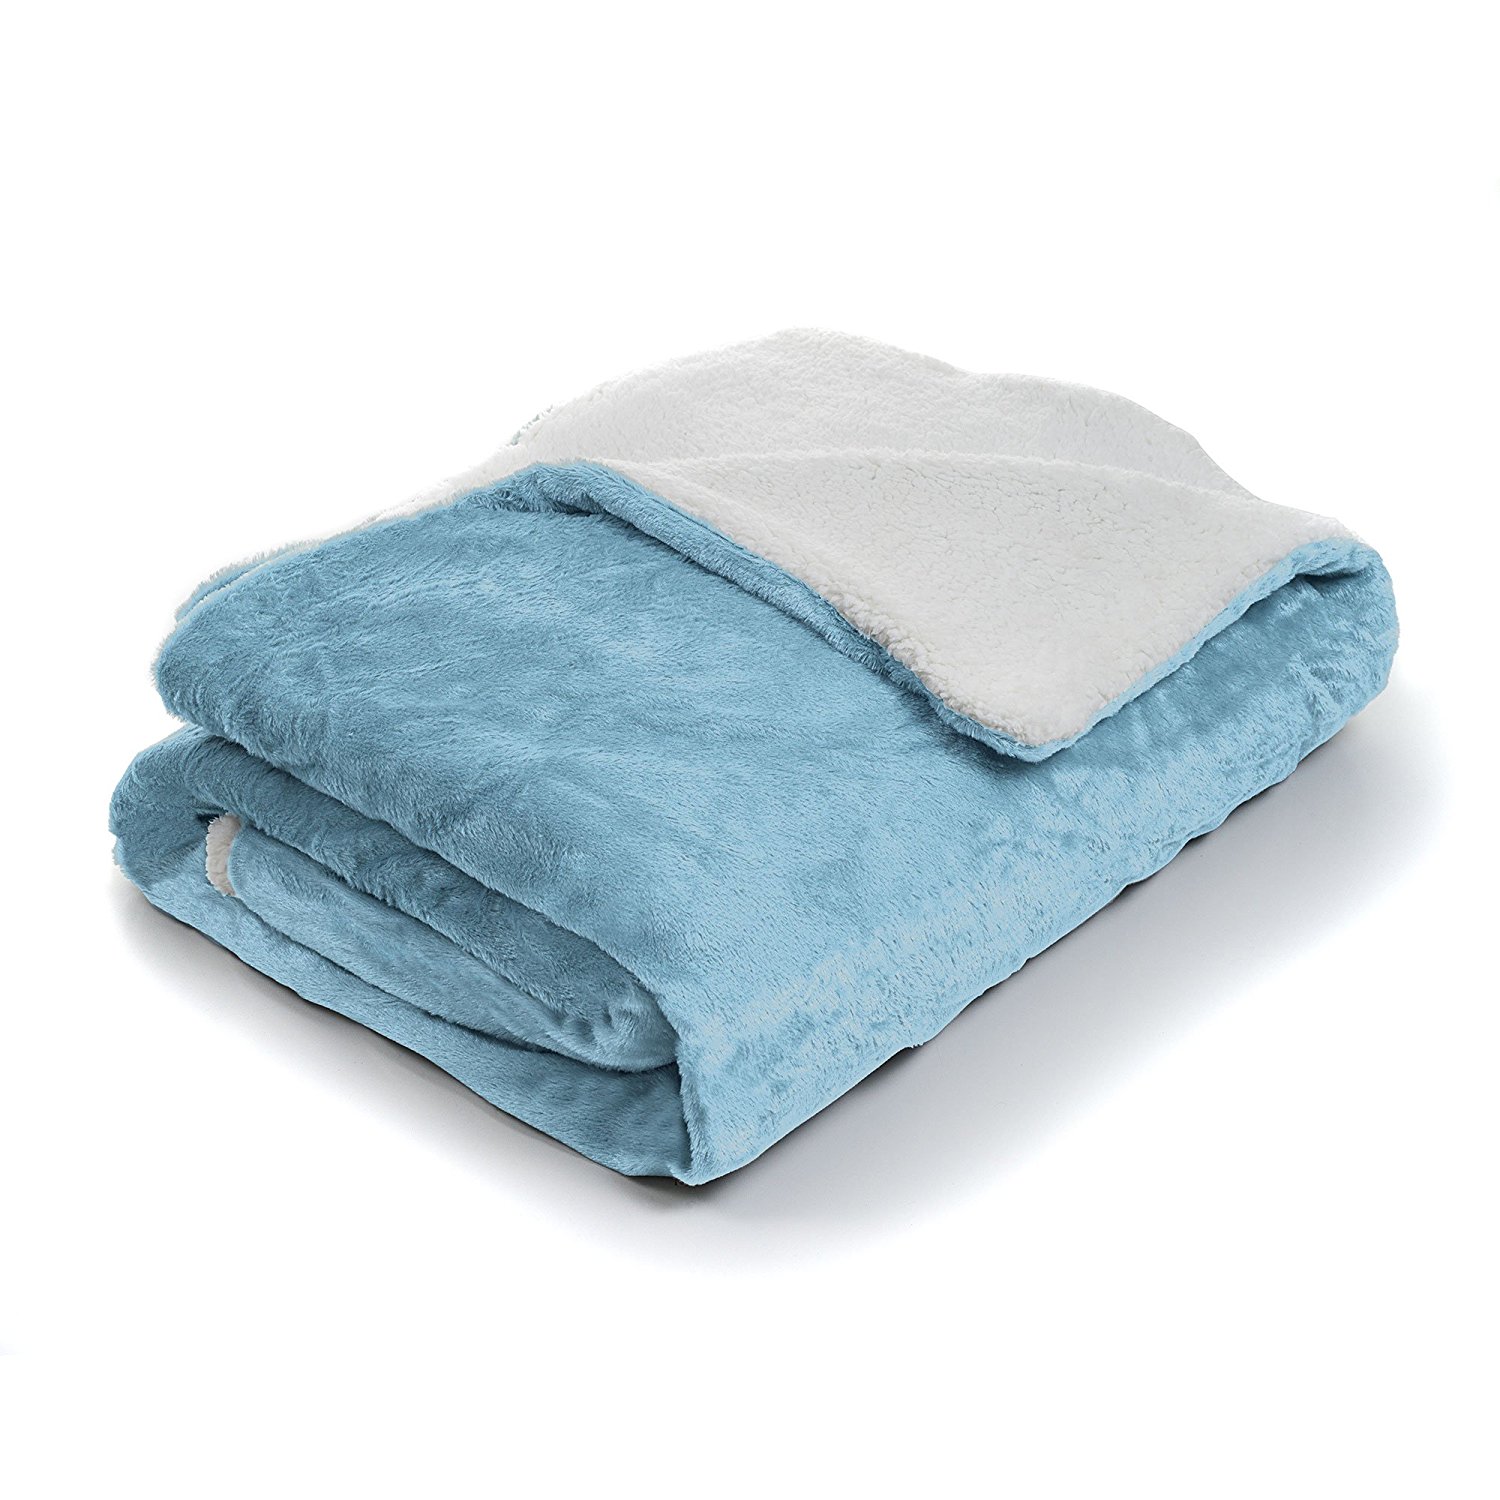 Amazon.com: Bedford Home Fleece Blanket with Sherpa Backing, Full ...